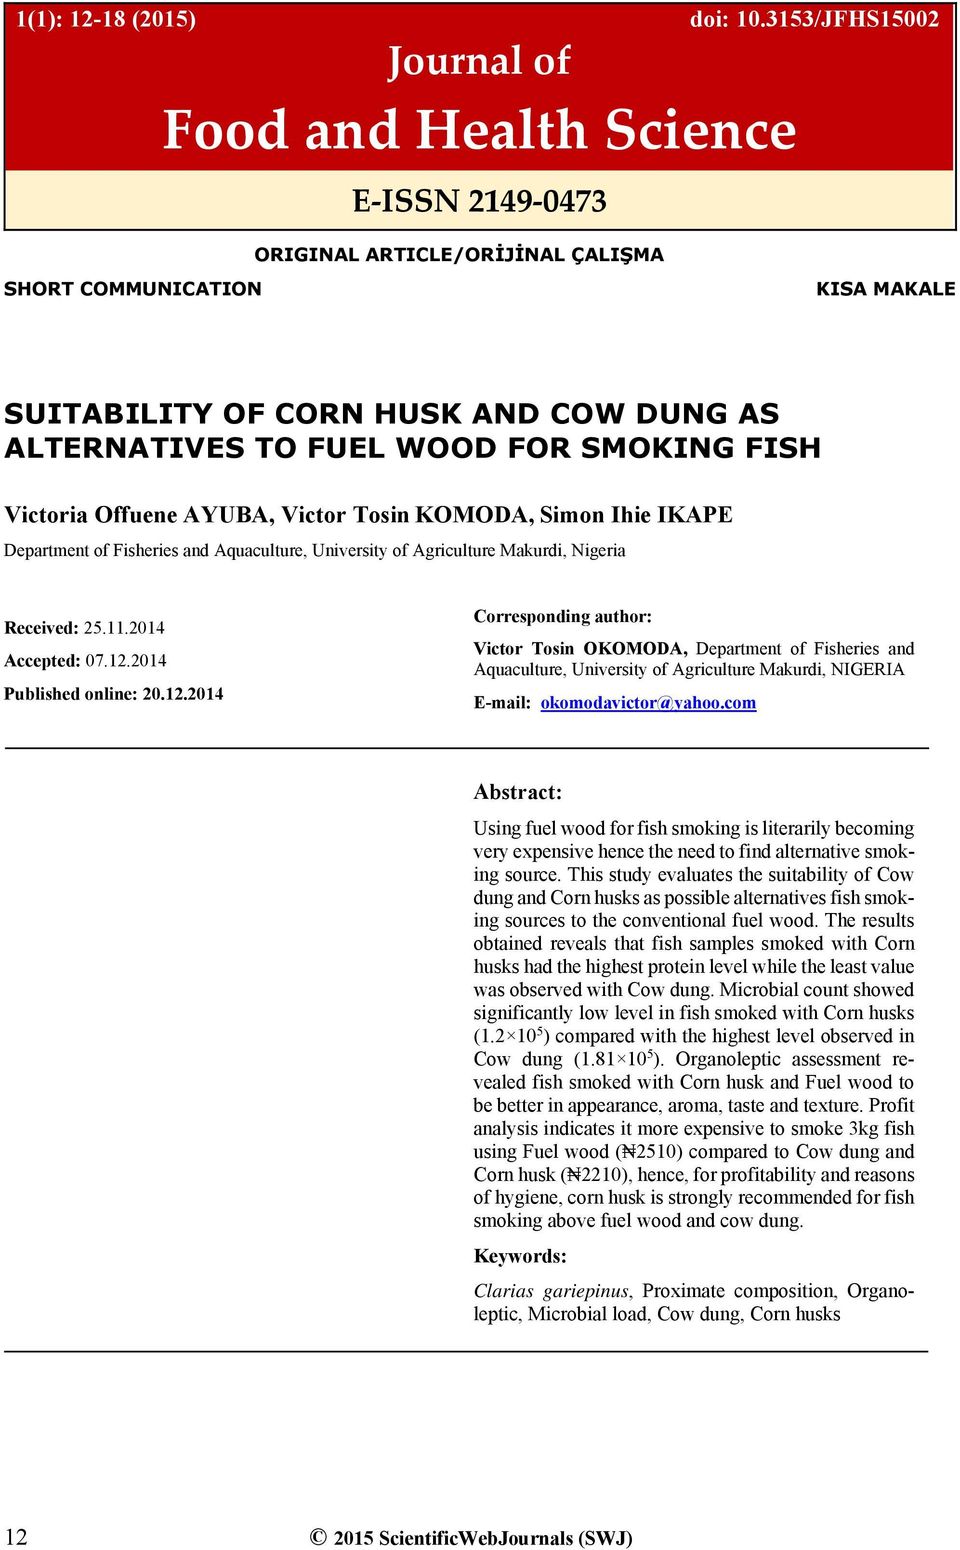 FOR SMOKING FISH Victoria Offuene AYUBA, Victor Tosin KOMODA, Simon Ihie IKAPE Department of Fisheries and Aquaculture, University of Agriculture Makurdi, Nigeria Received: 25.11.2014 Accepted: 07.12.